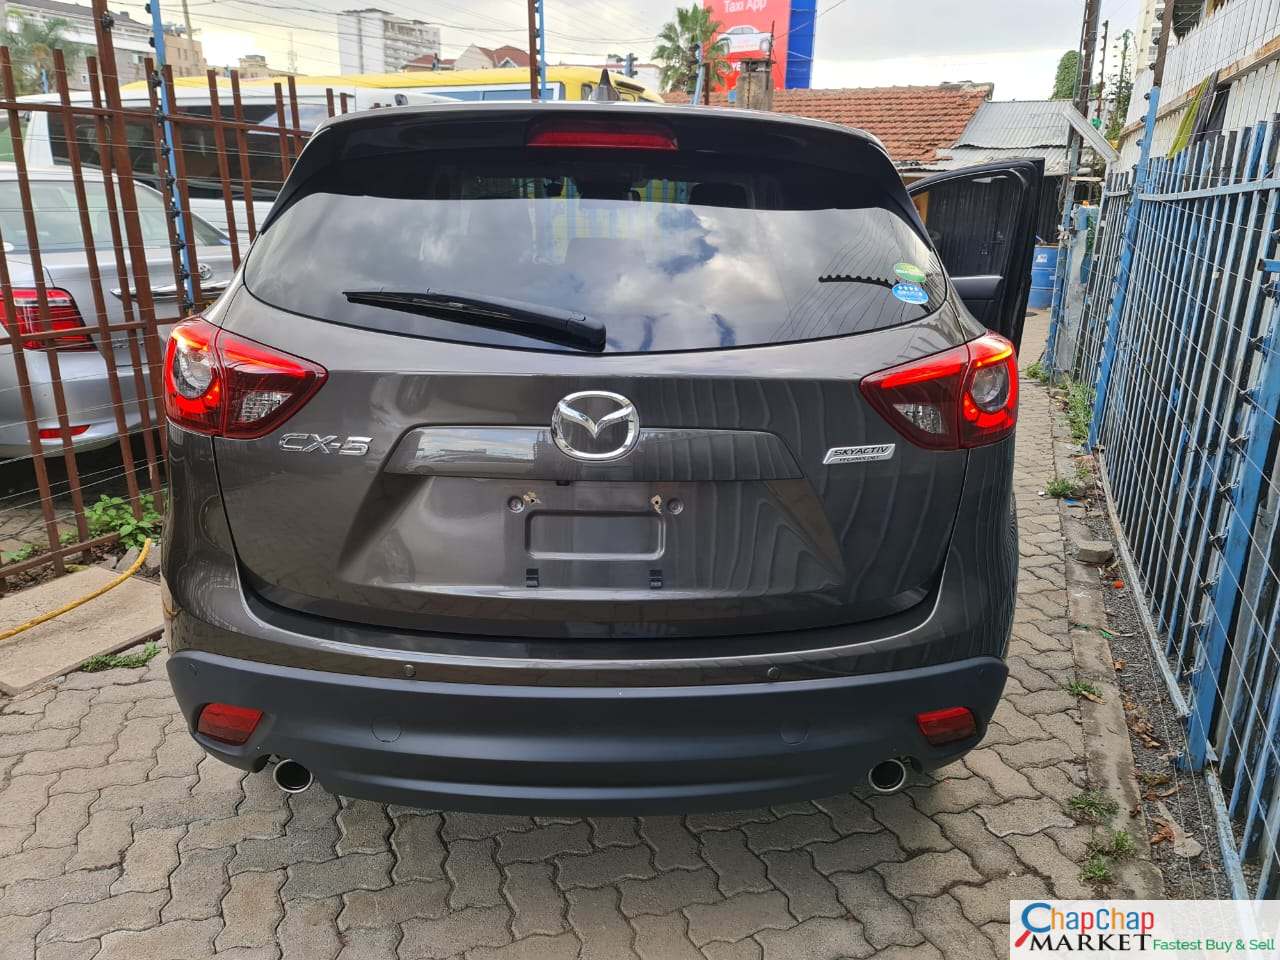 Cars Cars For Sale/Vehicles-Mazda CX-5 LATEST CHEAPEST You Pay 30% DEPOSIT TRADE IN OK EXCLUSIVE